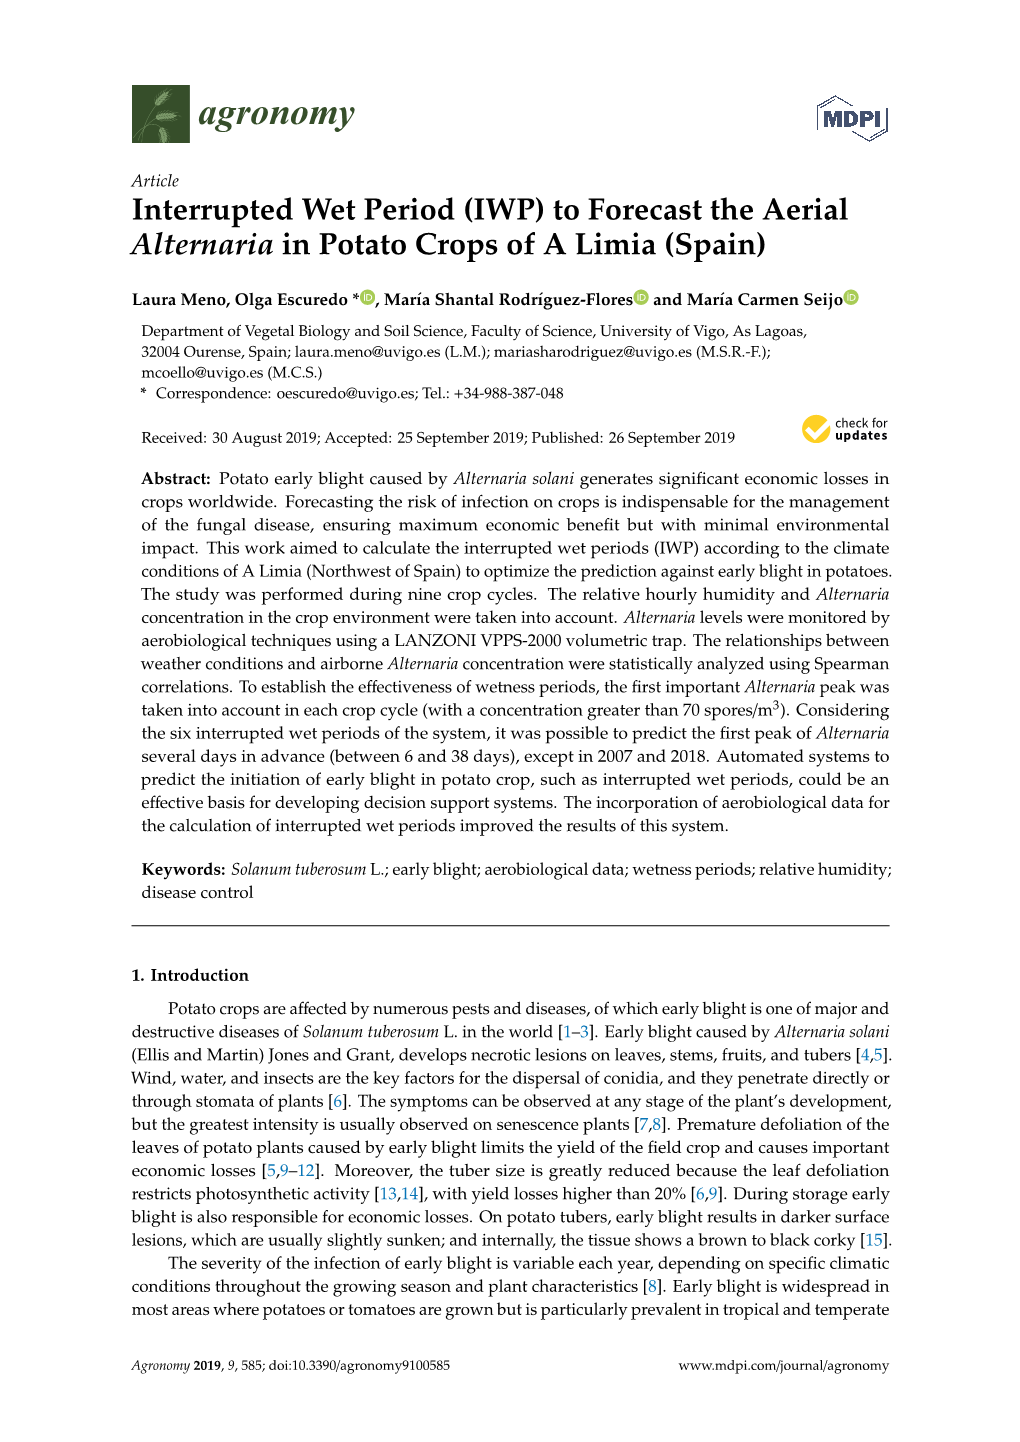 IWP) to Forecast the Aerial Alternaria in Potato Crops of a Limia (Spain